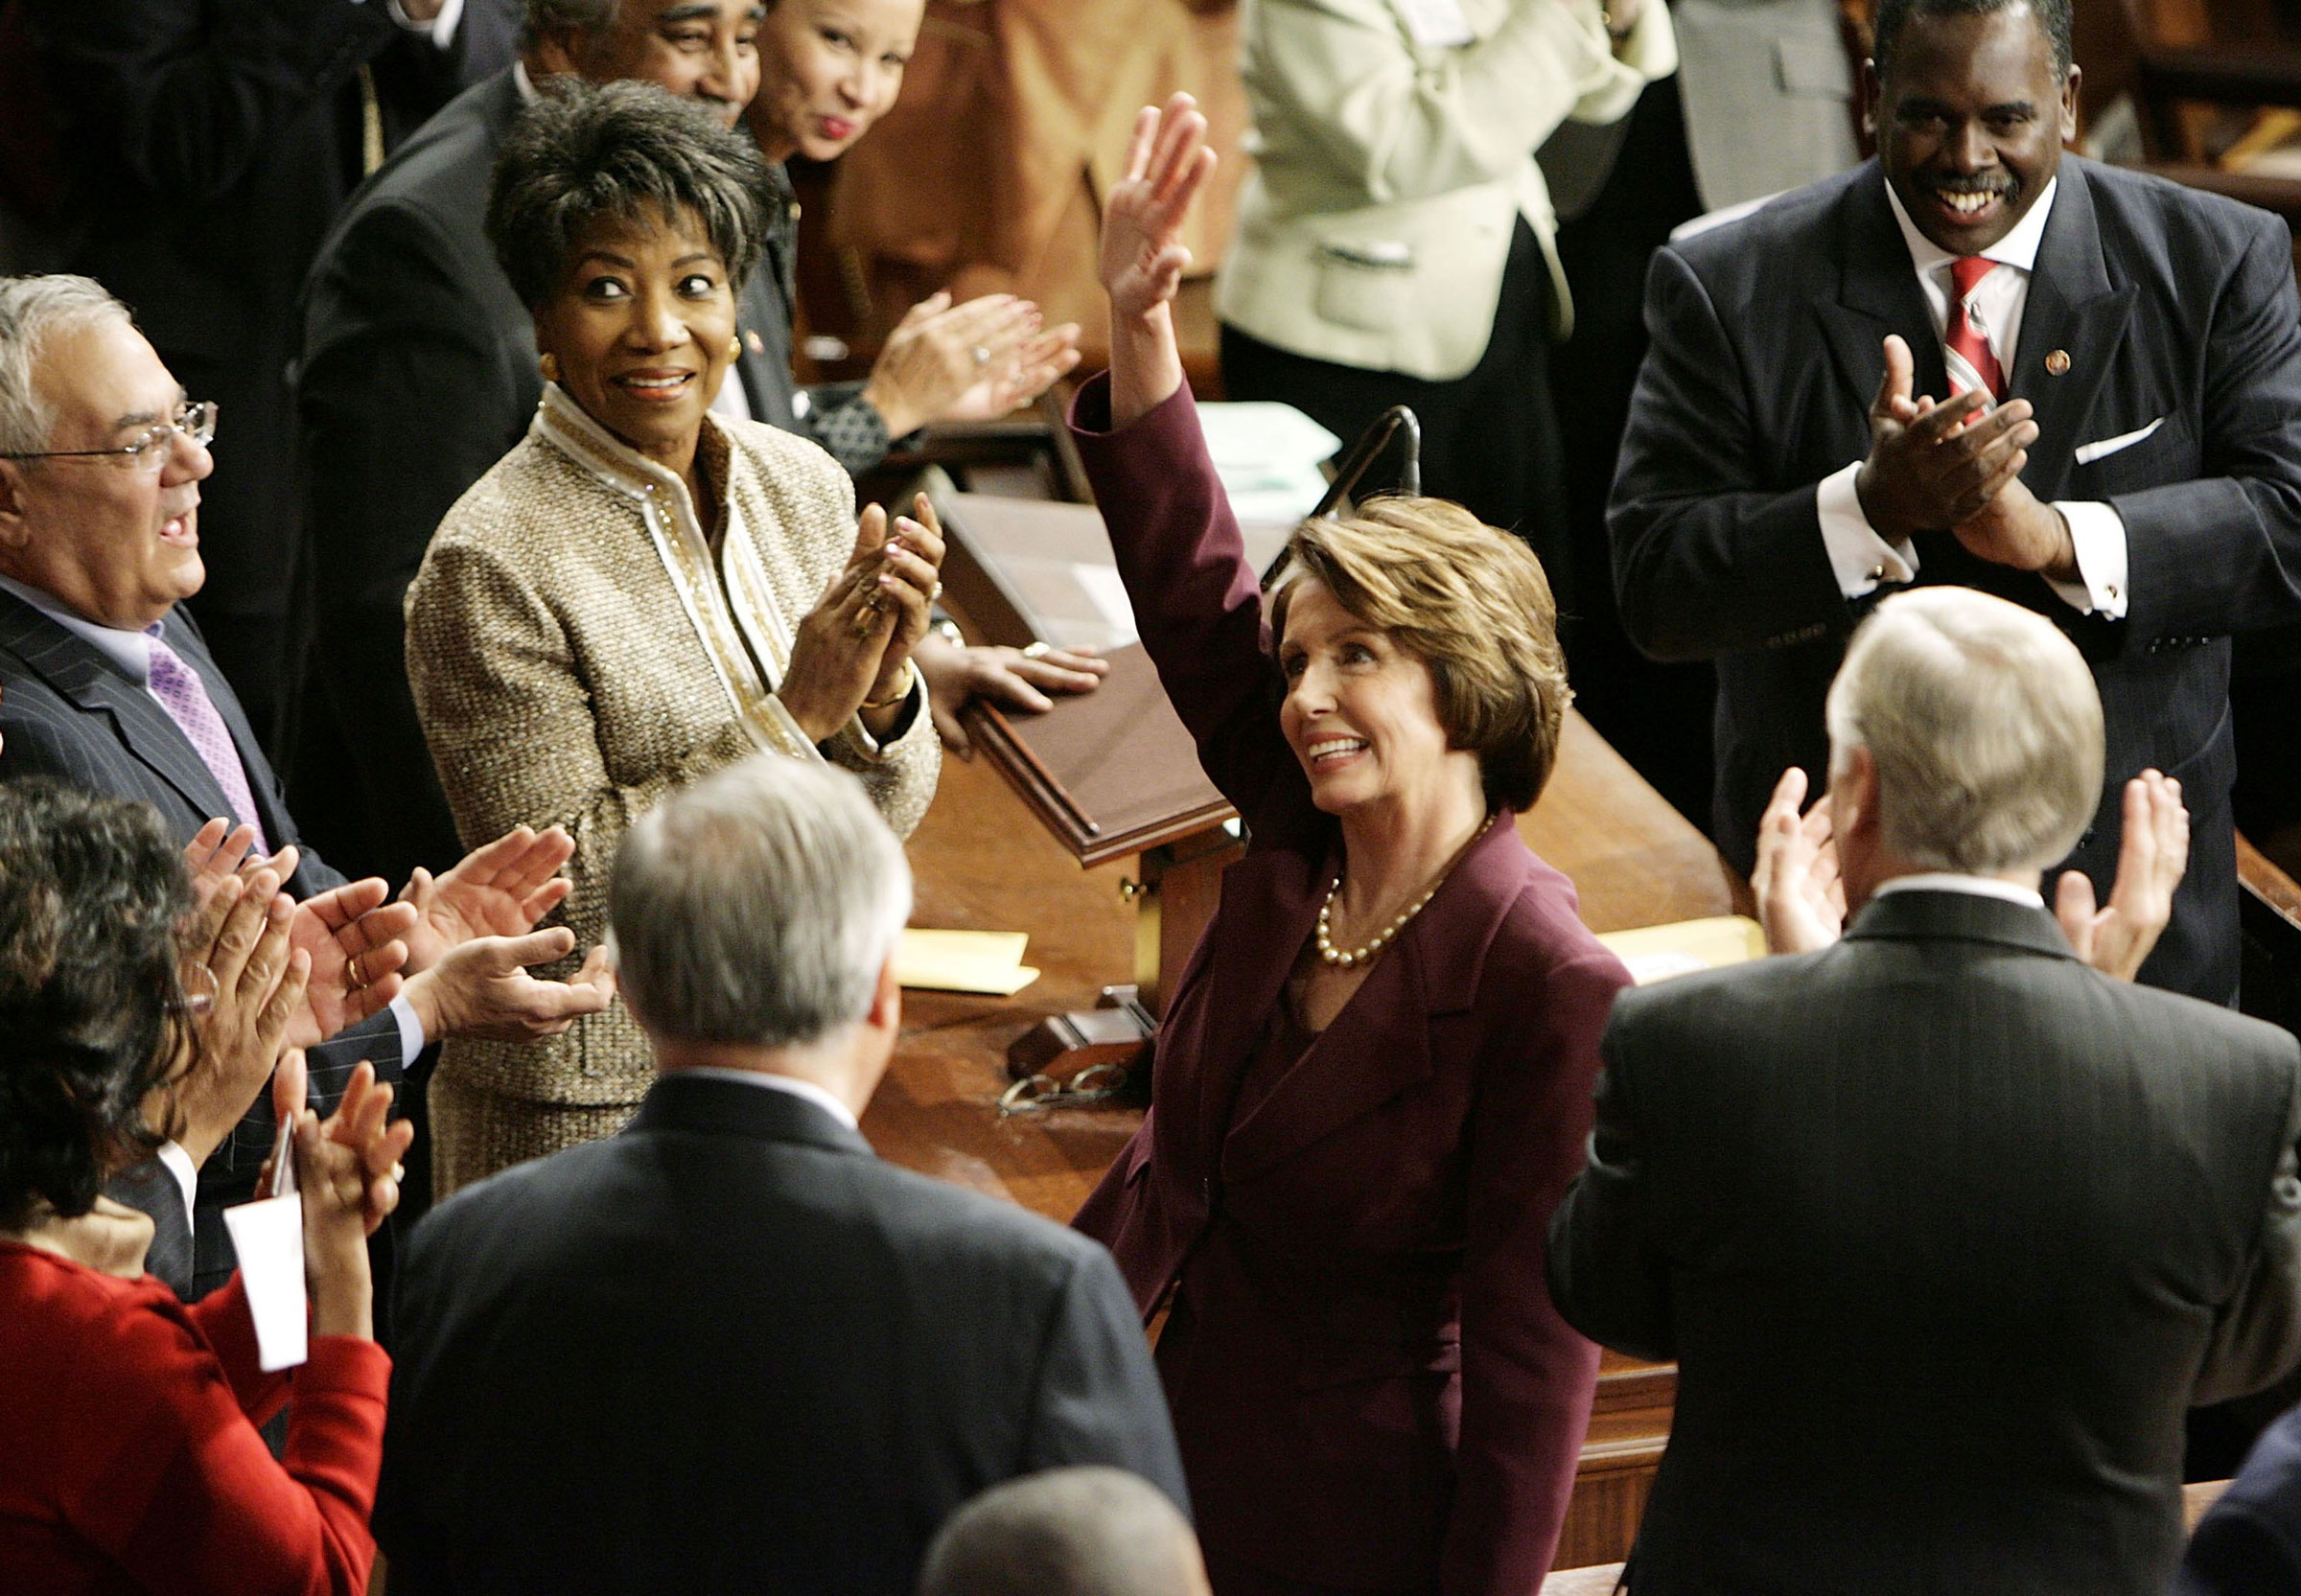 Nancy Pelosi waves to colleagues as she is nominated as the next Speaker of the House during a swearing-in ceremony for the 110th Congress in the House of Representatives at the U.S. Capitol in Washington, DC on January 4, 2007. (Chip Somodevilla —Getty Images)